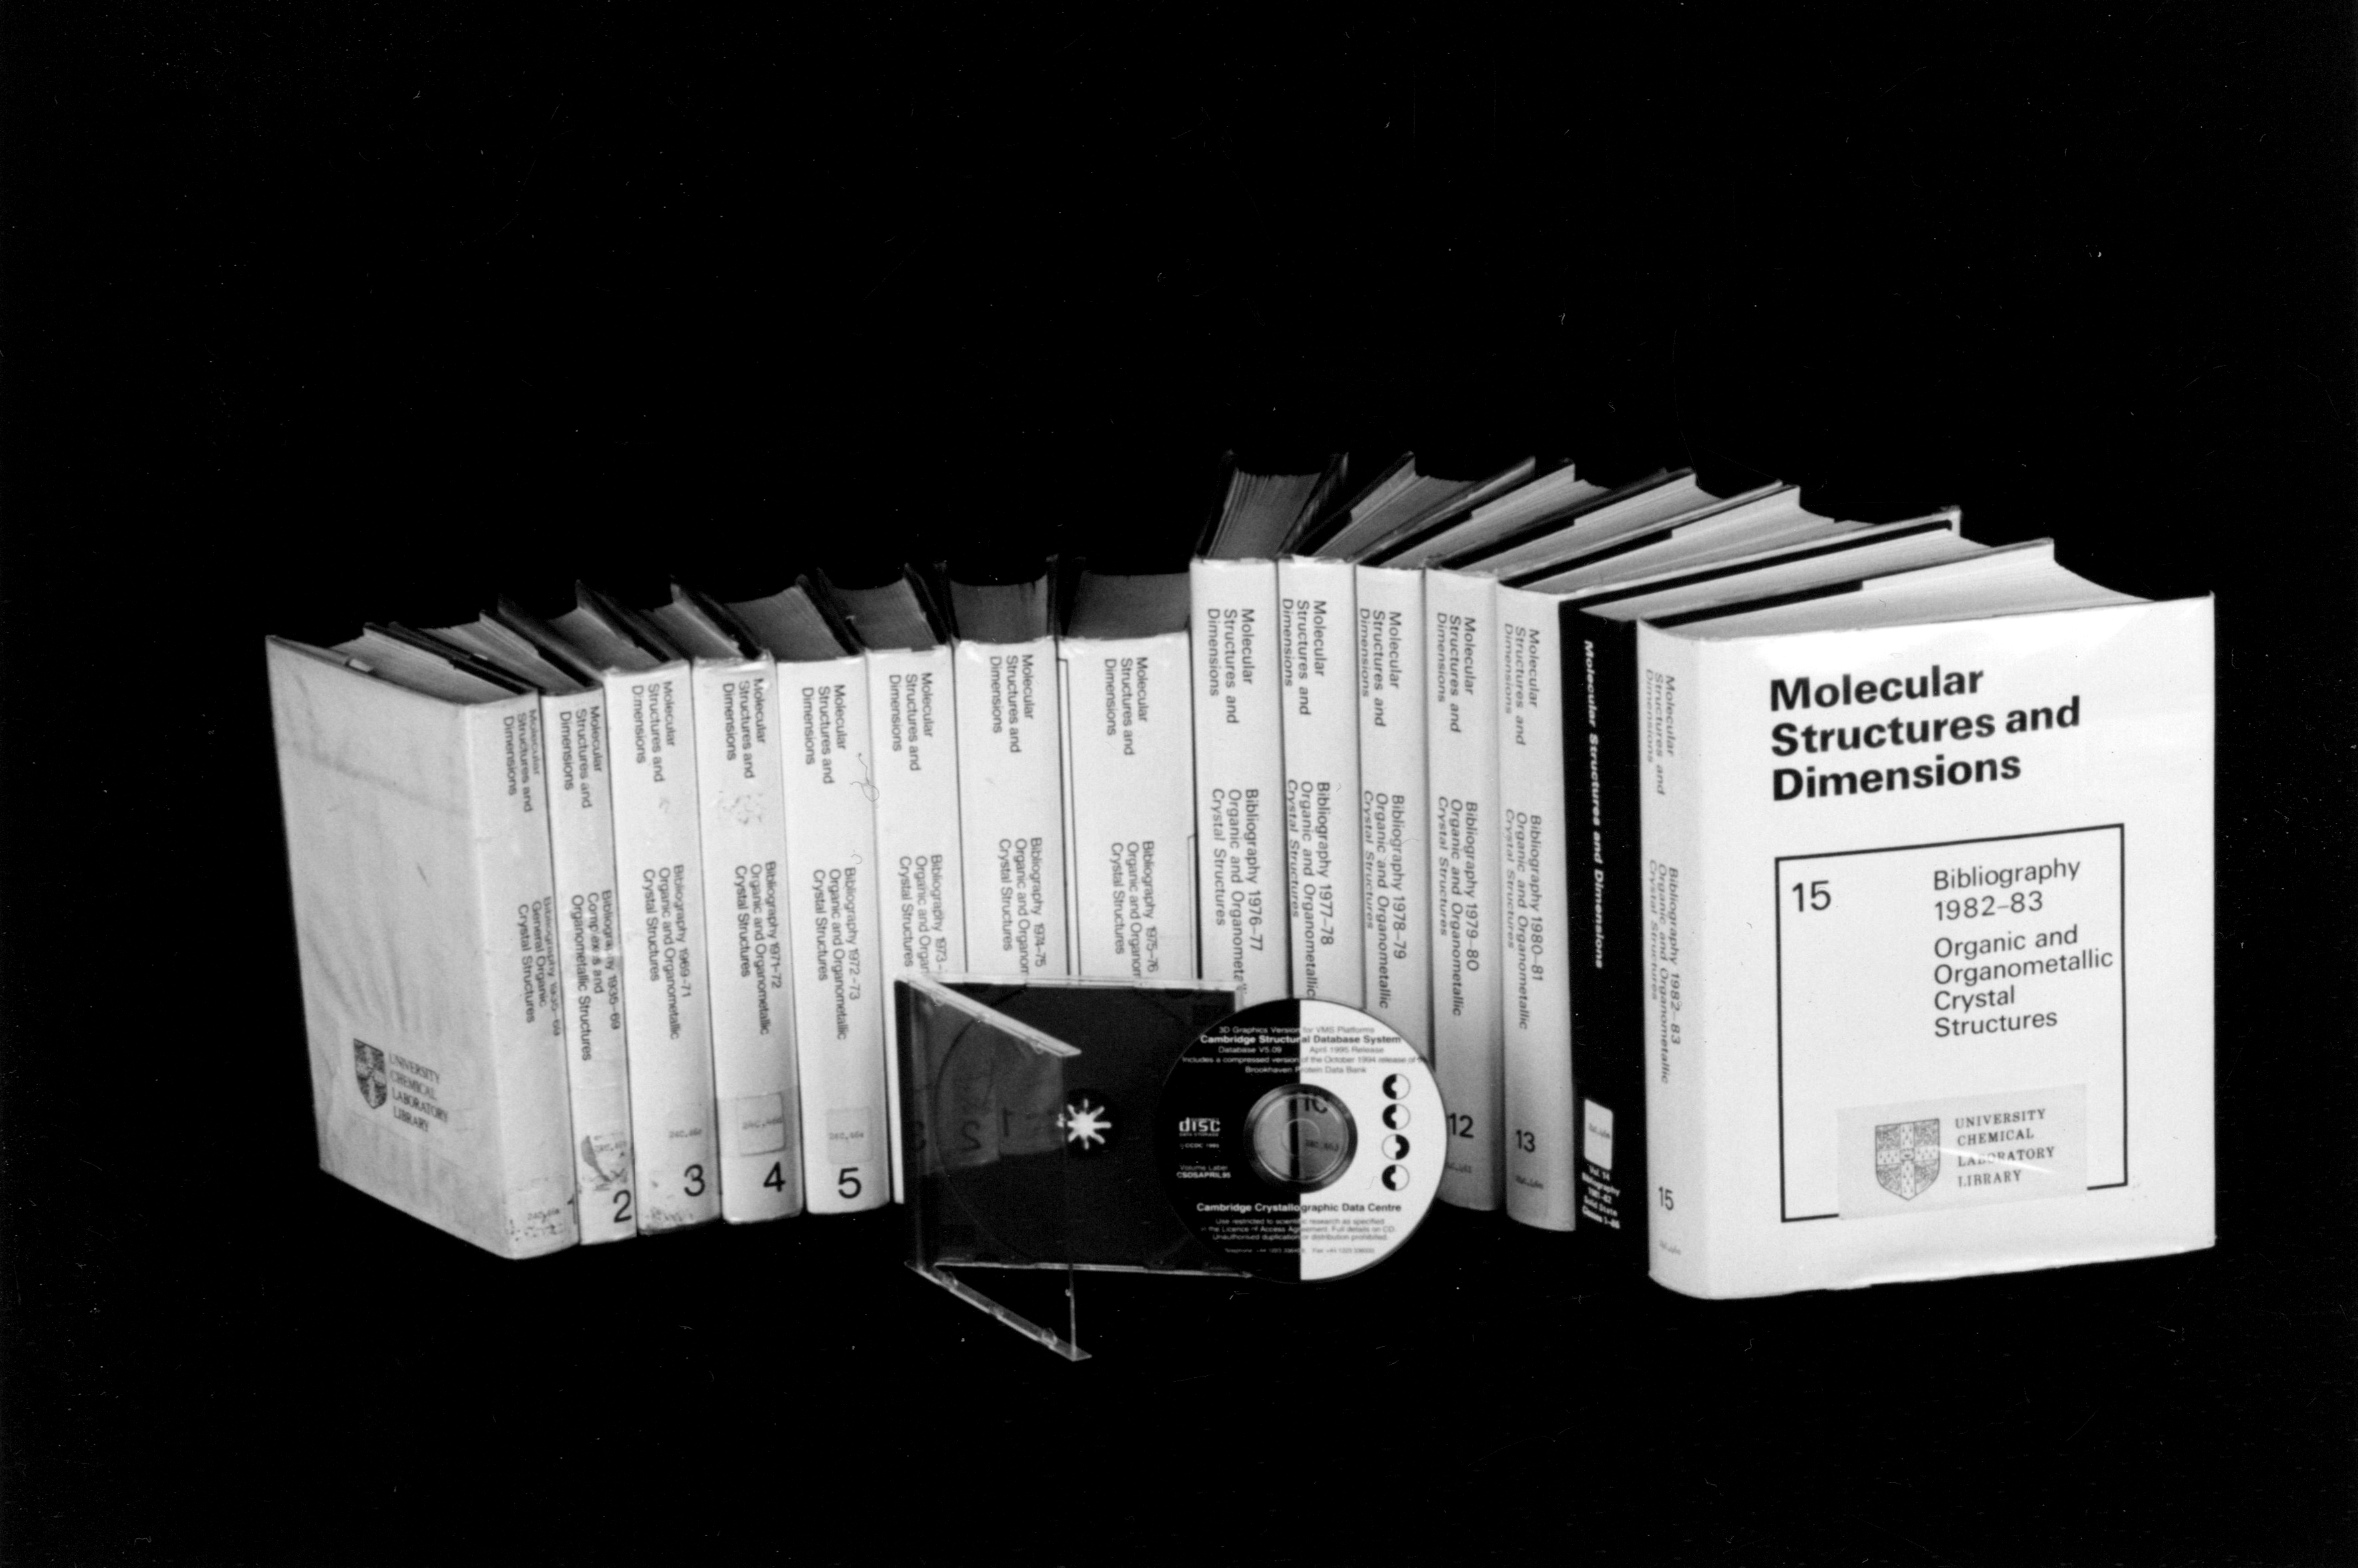 Early versions of the CSD in book form alongside a later version of the CSD on CD